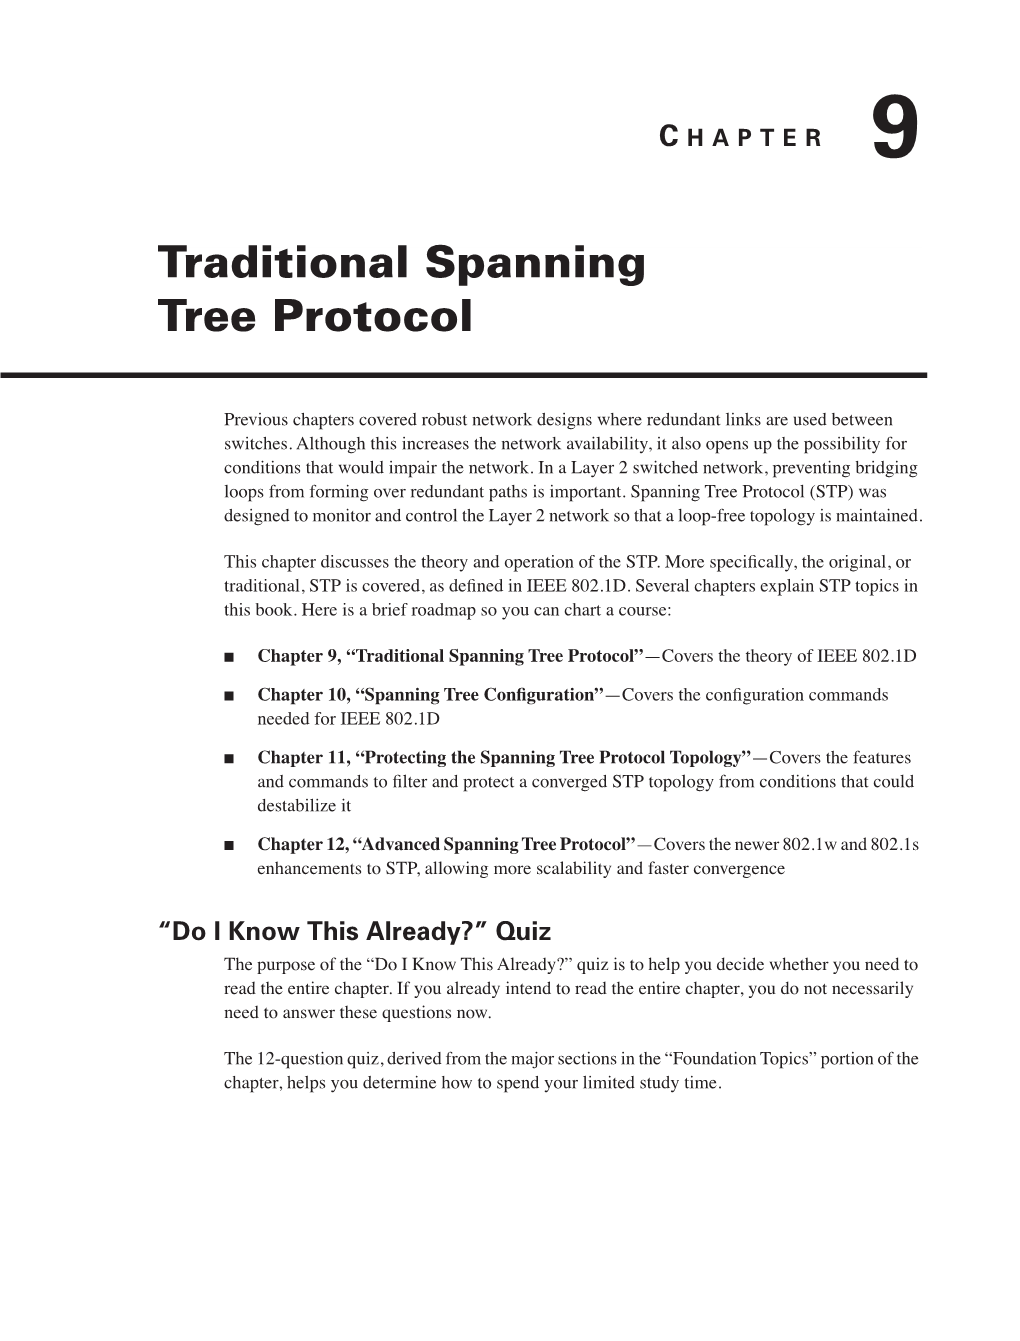 Chapter 9: Traditional Spanning Tree Protocol